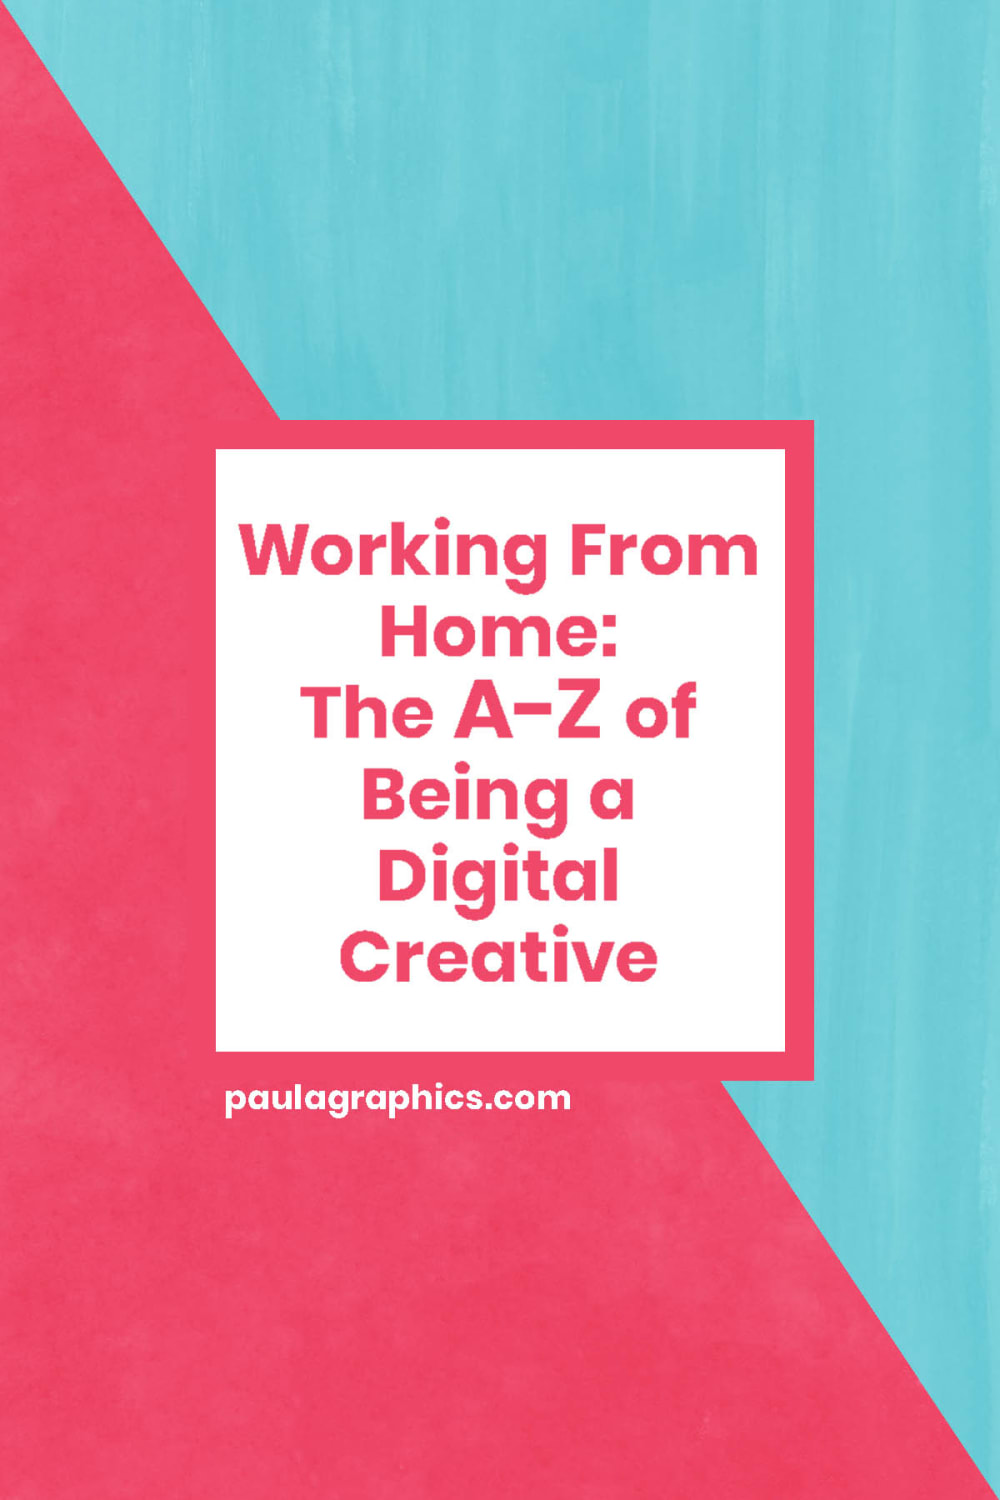 Working From Home: The A-Z of Being a Digital Creative